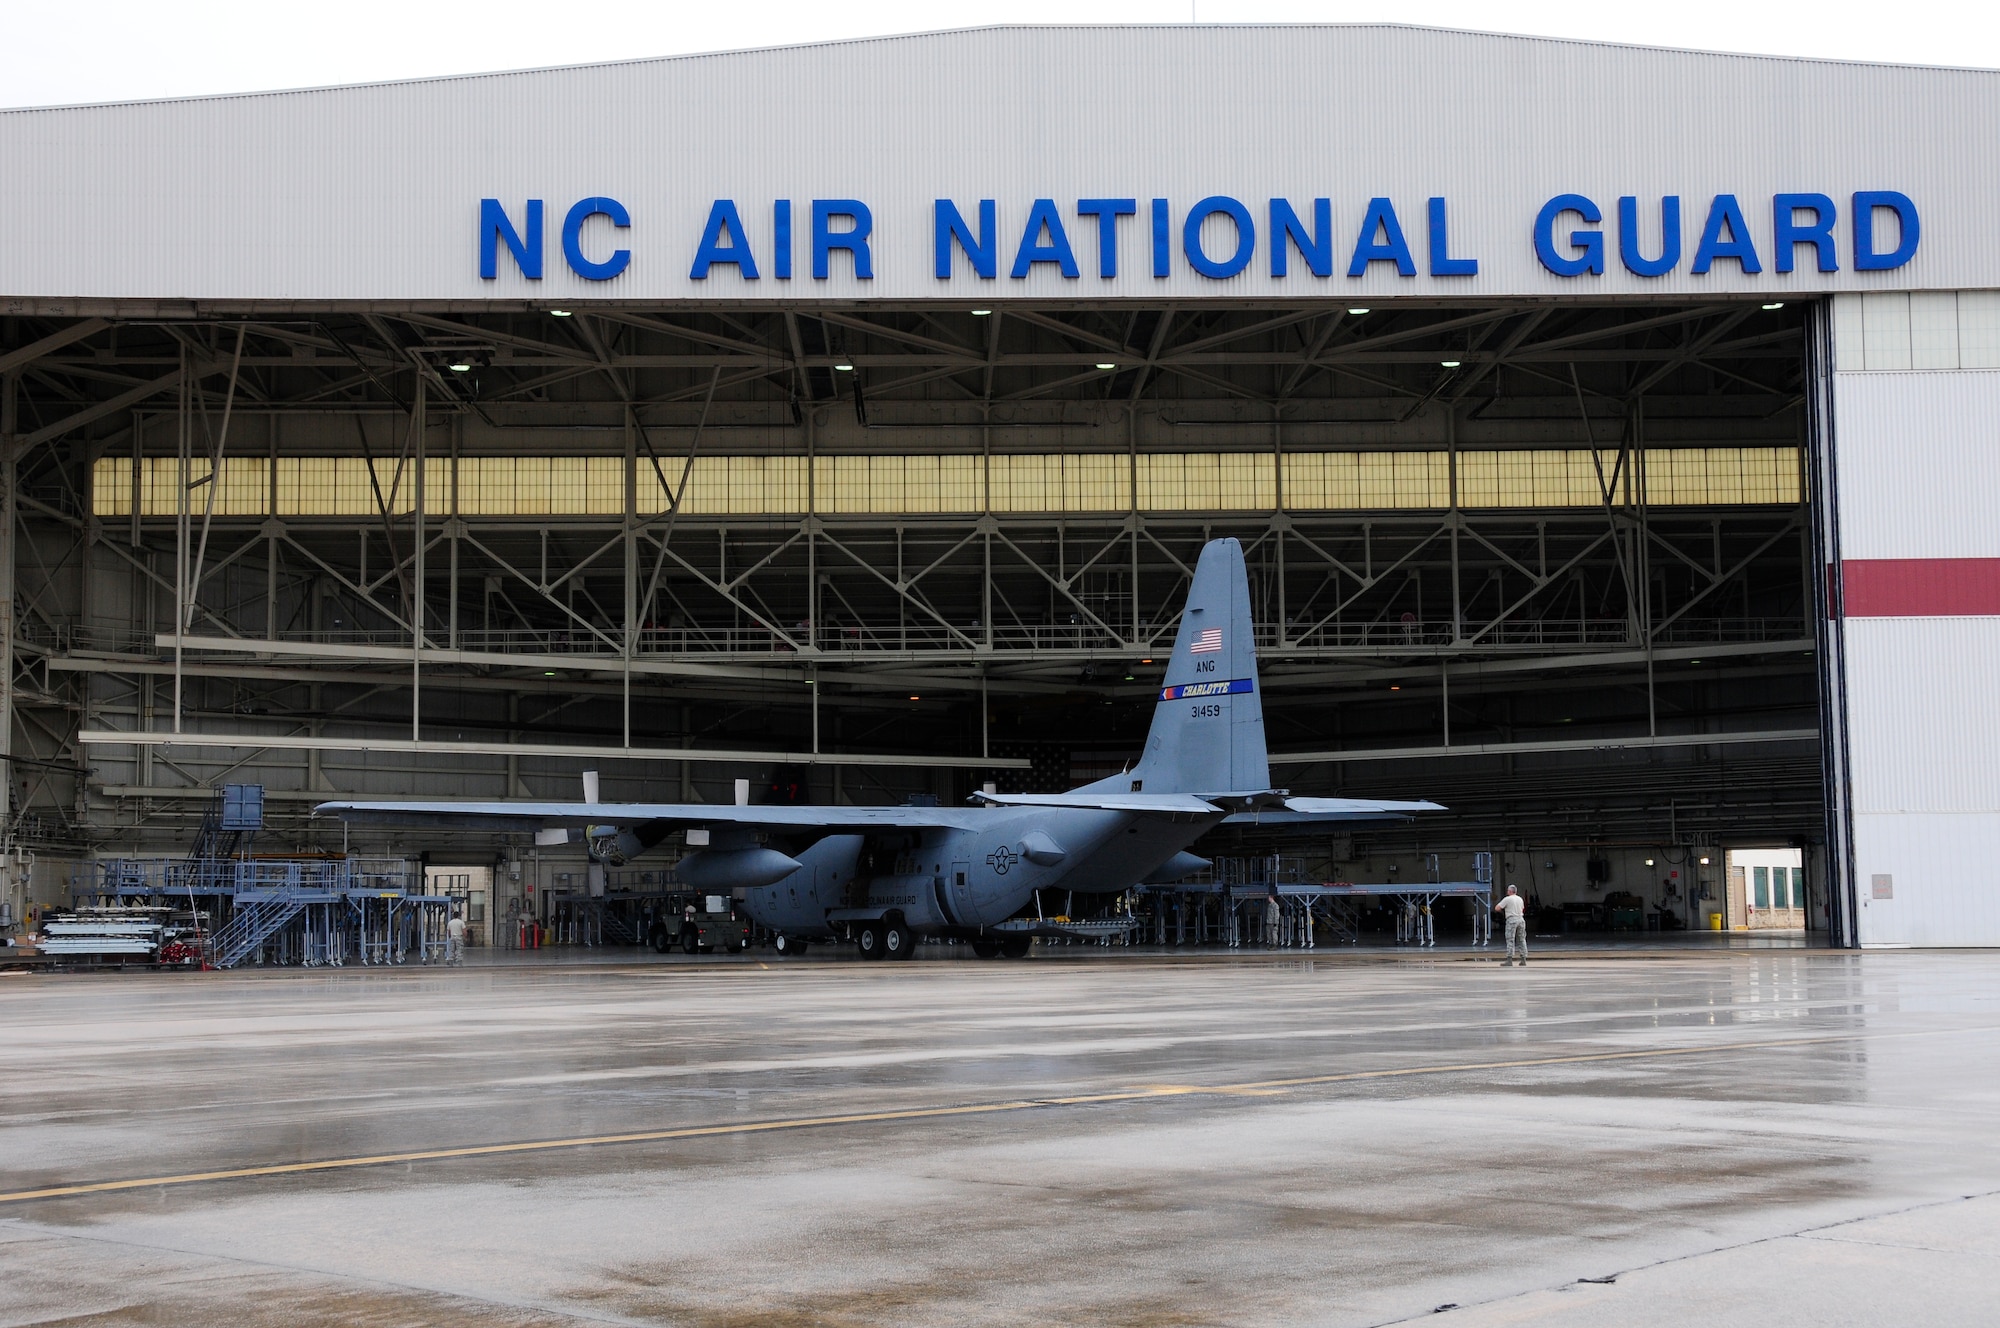 A 145th Airlift Wing, C-130 Hercules aircraft is towed into a maintenance hangar at the North Carolina Air National Guard base, Charlotte Douglas International Airport, June 2, 2015. This C-130 is the first aircraft that maintainers will work on utilizing the long awaited Isochronal Inspection (ISO) Aircraft Maintenance Platforms that arrived May 23, 2015. These stands will improve overall safety for maintenance personnel and provide the maintainers better access to all parts of the C-130. (U.S. Air National Guard photo by Master Sgt. Patricia F. Moran, 145th Public Affairs/Released)